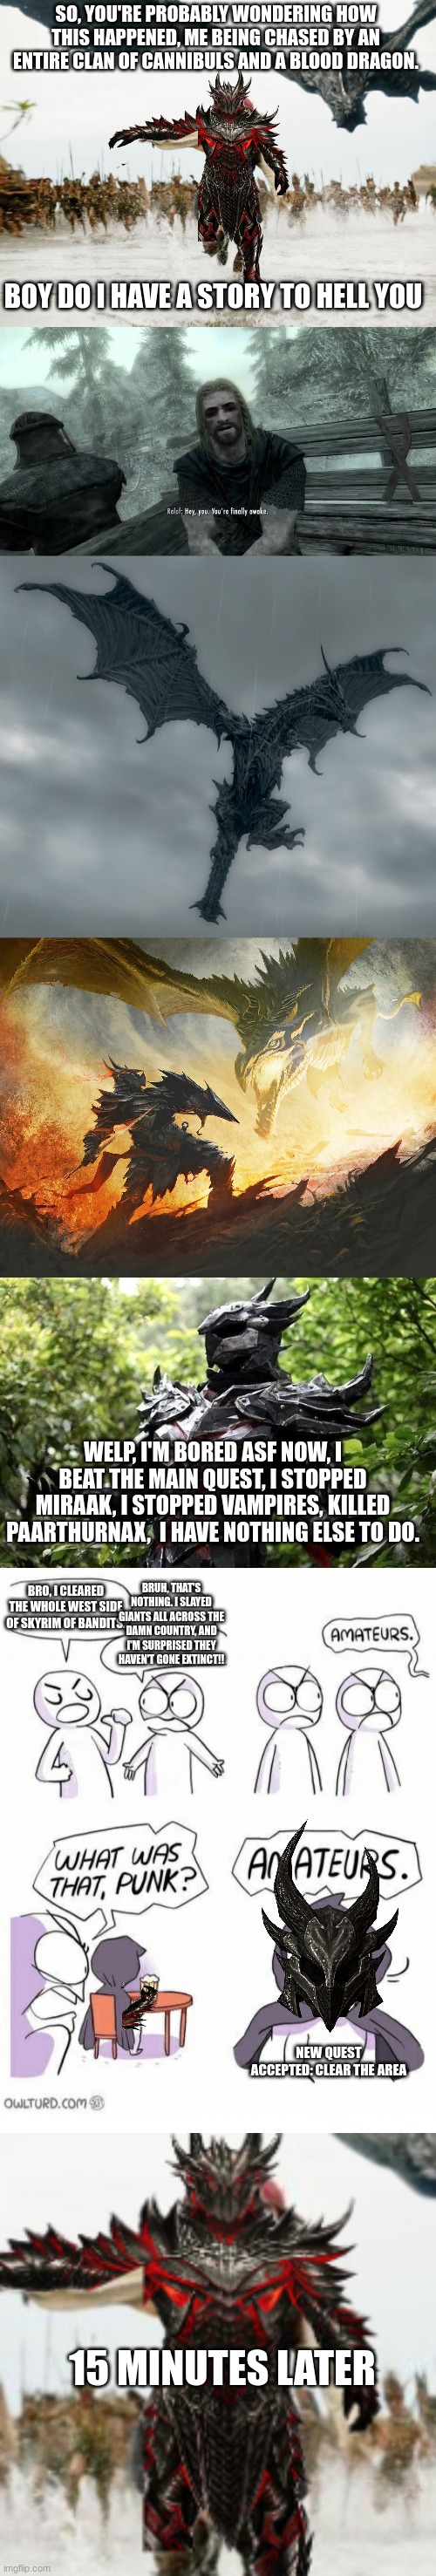 Enjoy | SO, YOU'RE PROBABLY WONDERING HOW THIS HAPPENED, ME BEING CHASED BY AN ENTIRE CLAN OF CANNIBULS AND A BLOOD DRAGON. BOY DO I HAVE A STORY TO HELL YOU; WELP, I'M BORED ASF NOW, I BEAT THE MAIN QUEST, I STOPPED MIRAAK, I STOPPED VAMPIRES, KILLED PAARTHURNAX,  I HAVE NOTHING ELSE TO DO. BRO, I CLEARED THE WHOLE WEST SIDE OF SKYRIM OF BANDITS. BRUH, THAT'S NOTHING. I SLAYED GIANTS ALL ACROSS THE DAMN COUNTRY, AND I'M SURPRISED THEY HAVEN'T GONE EXTINCT!! NEW QUEST ACCEPTED: CLEAR THE AREA; 15 MINUTES LATER | image tagged in memes,jack sparrow being chased,you're finally awake,alduin,amateurs | made w/ Imgflip meme maker